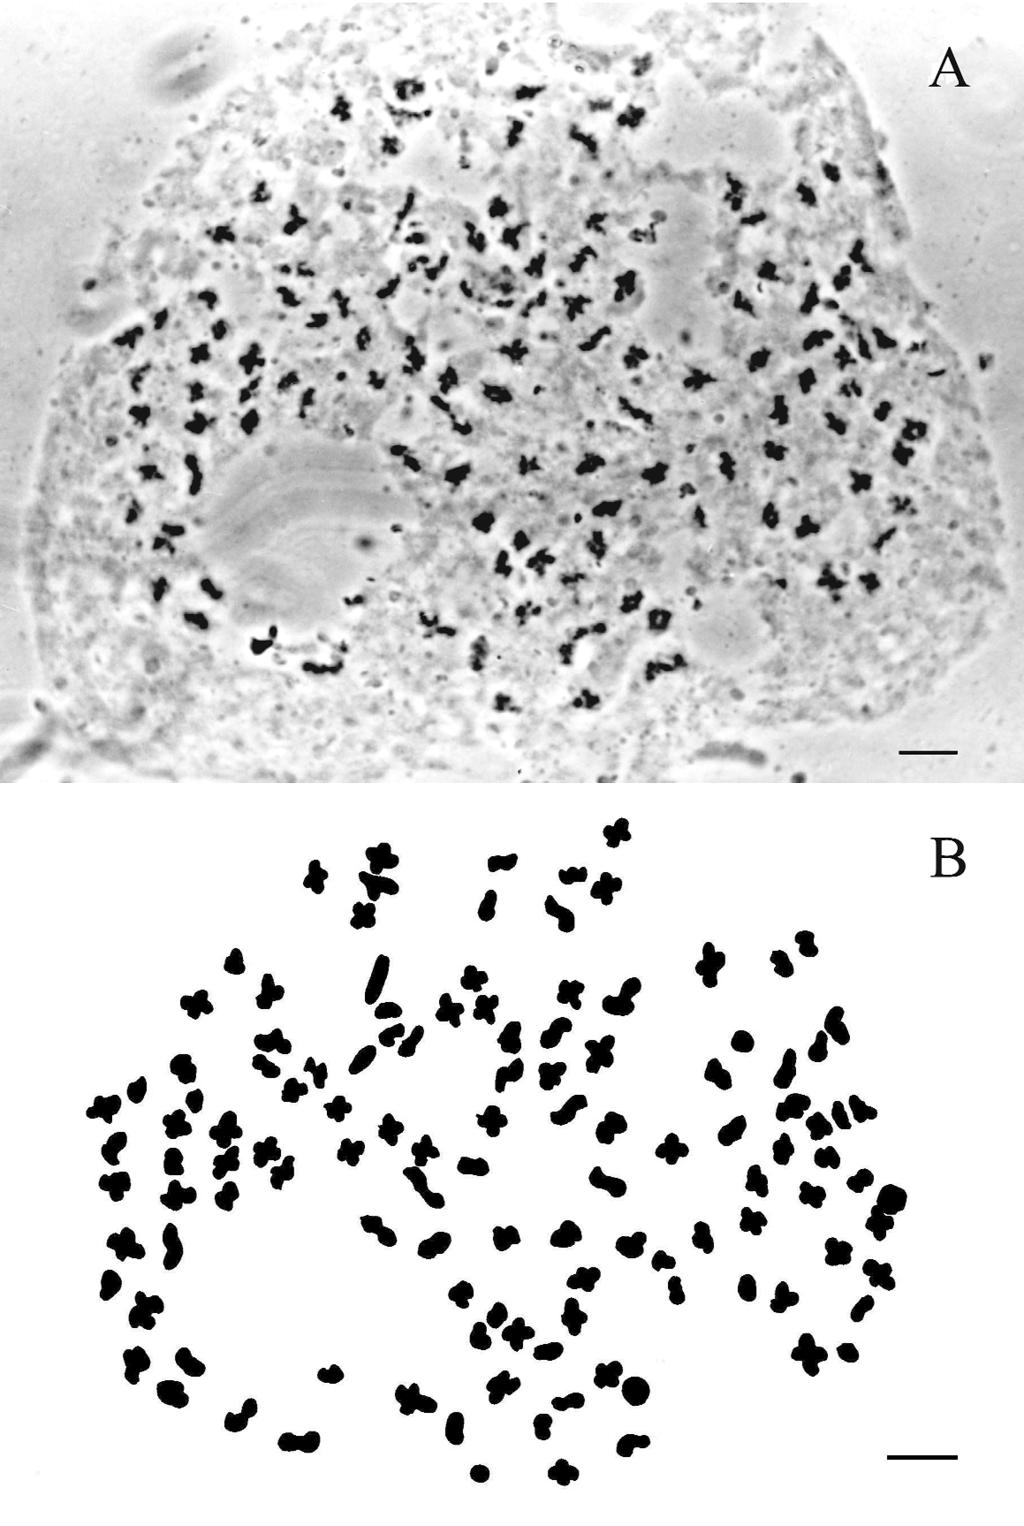 362 PERUZZI, CESCA and PUNTILLO Fig. 3 Chromosomes of Ophioglossum lusitanicum L. showing n = 120 bivalents (A); and relative drawing (B). Scale bars 5µm. Fig. 4 Metaphasic plate from root tips of Botrychium lunaria, 2n = 90 (A); and relative drawing (B).